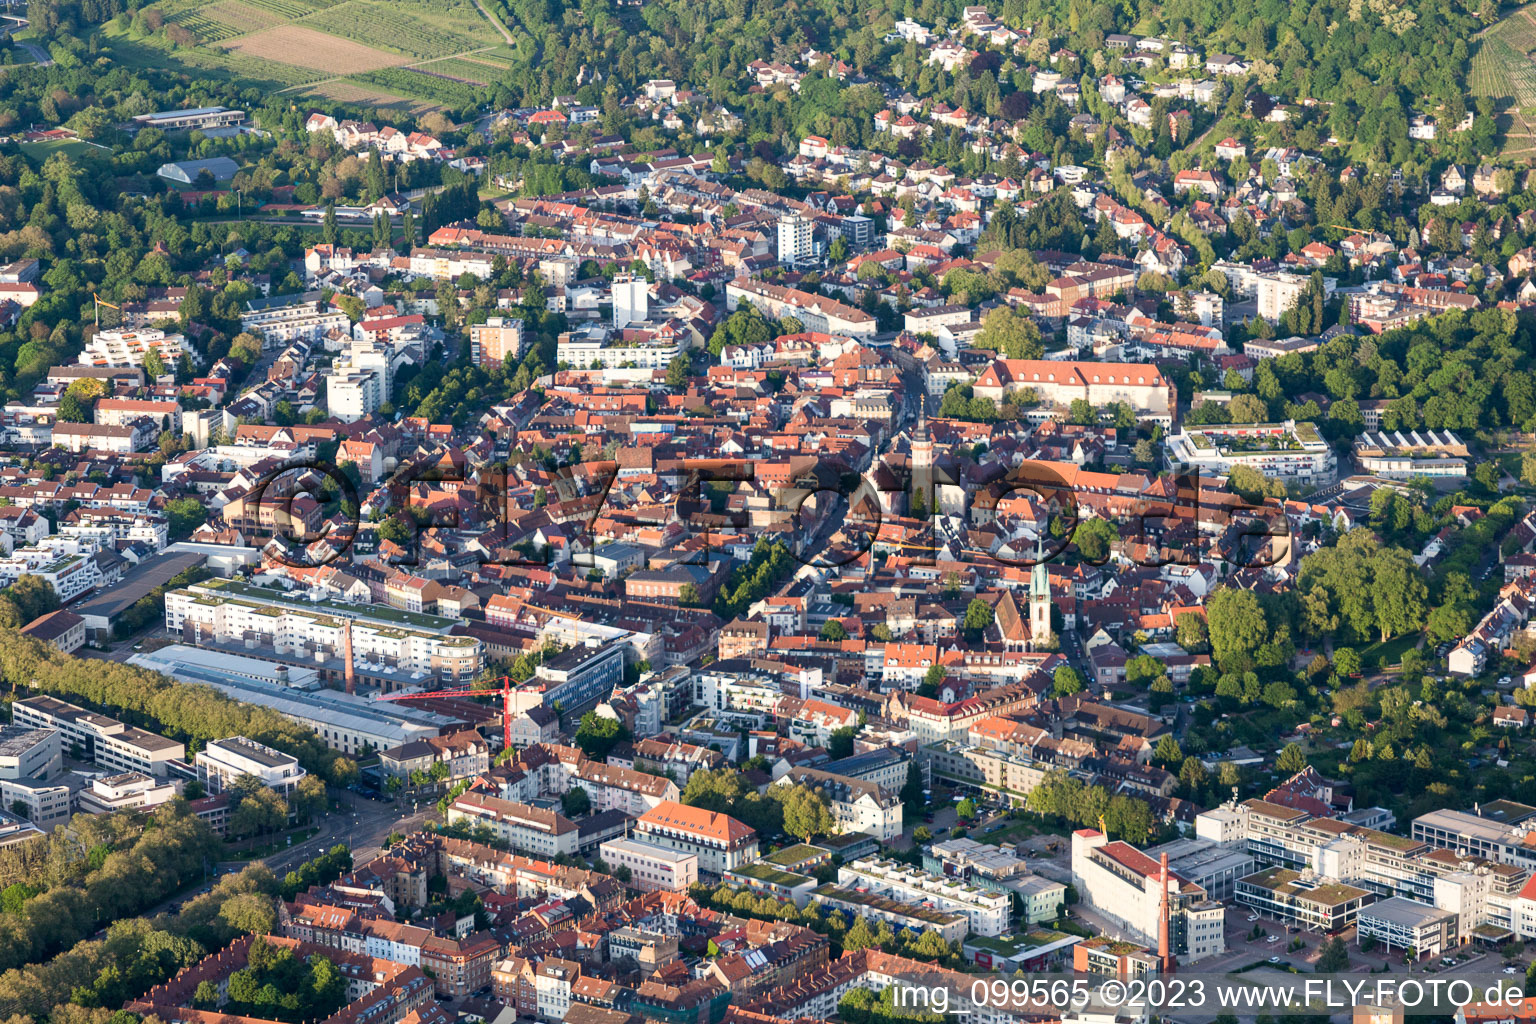 Drone recording of District Durlach in Karlsruhe in the state Baden-Wuerttemberg, Germany